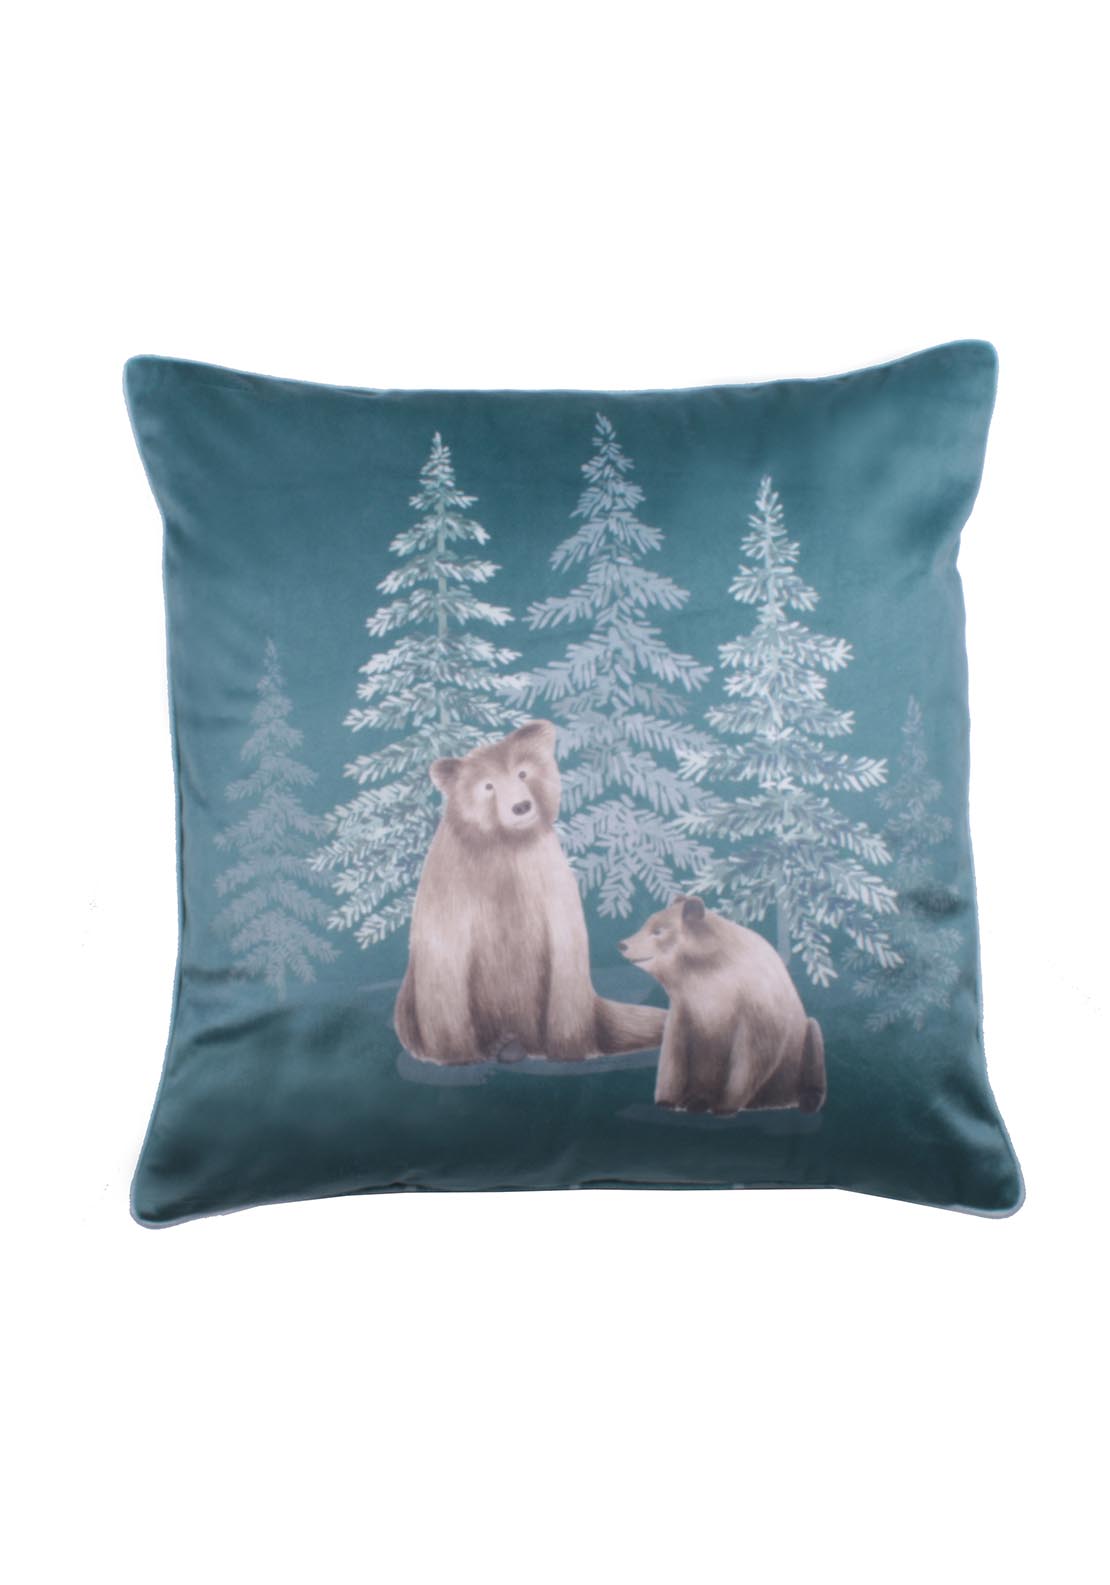 The Home Collection Soft Bear Cushion 43cm x 43cm - Green 1 Shaws Department Stores